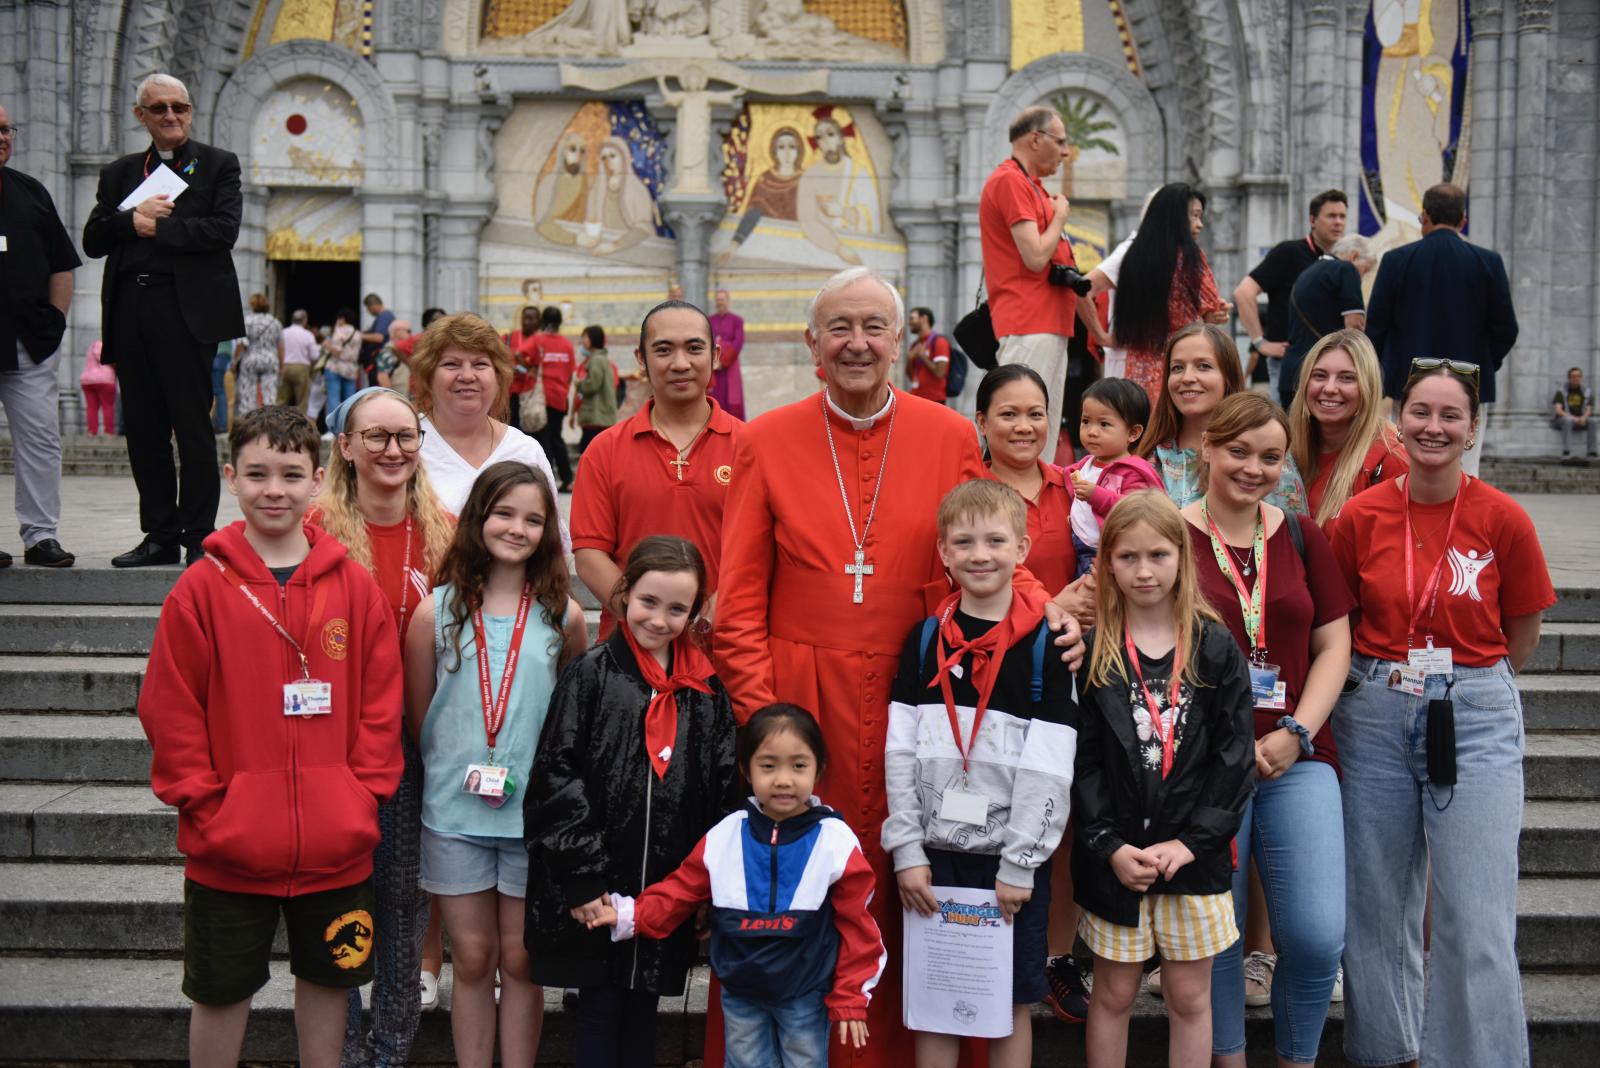 Going to Lourdes - Diocese of Westminster